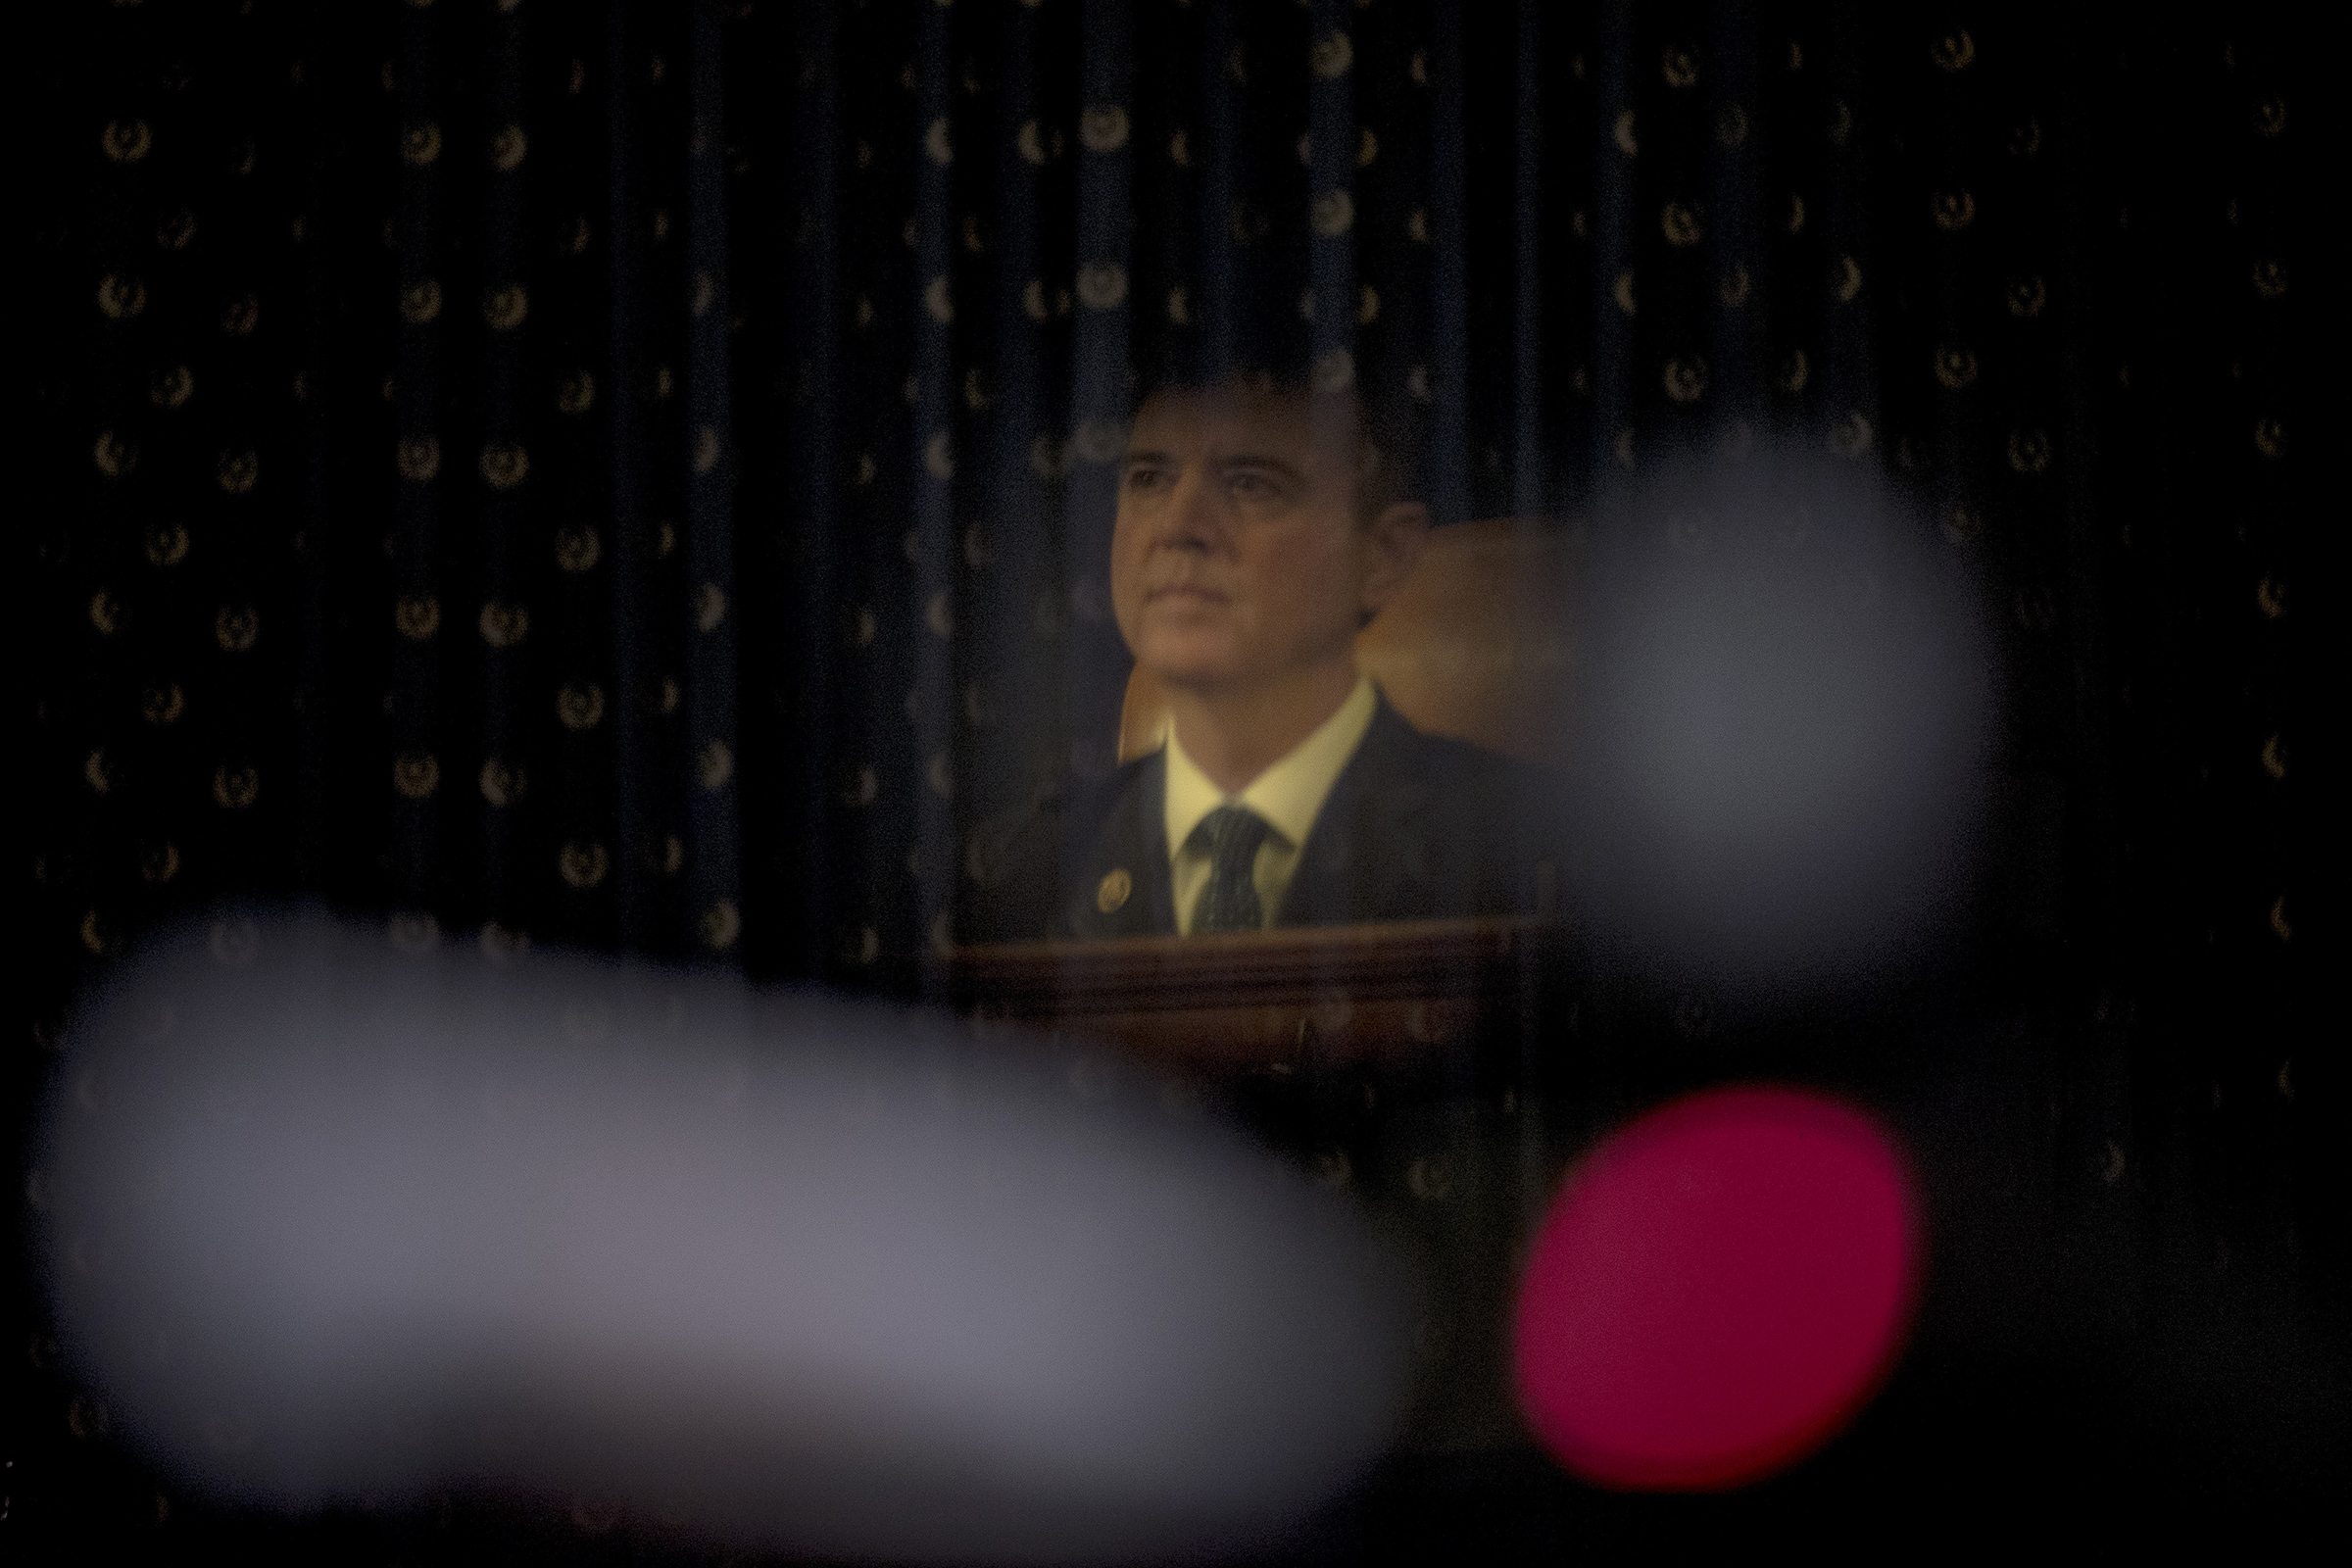 A reflection of Chairman Adam Schiff (D-Calif.) listening to testimony during the House Intelligence Committee hearing on the impeachment inquiry on Capitol Hill in Washington D.C., on Nov. 19, 2019. (Gabriella Demczuk for TIME)